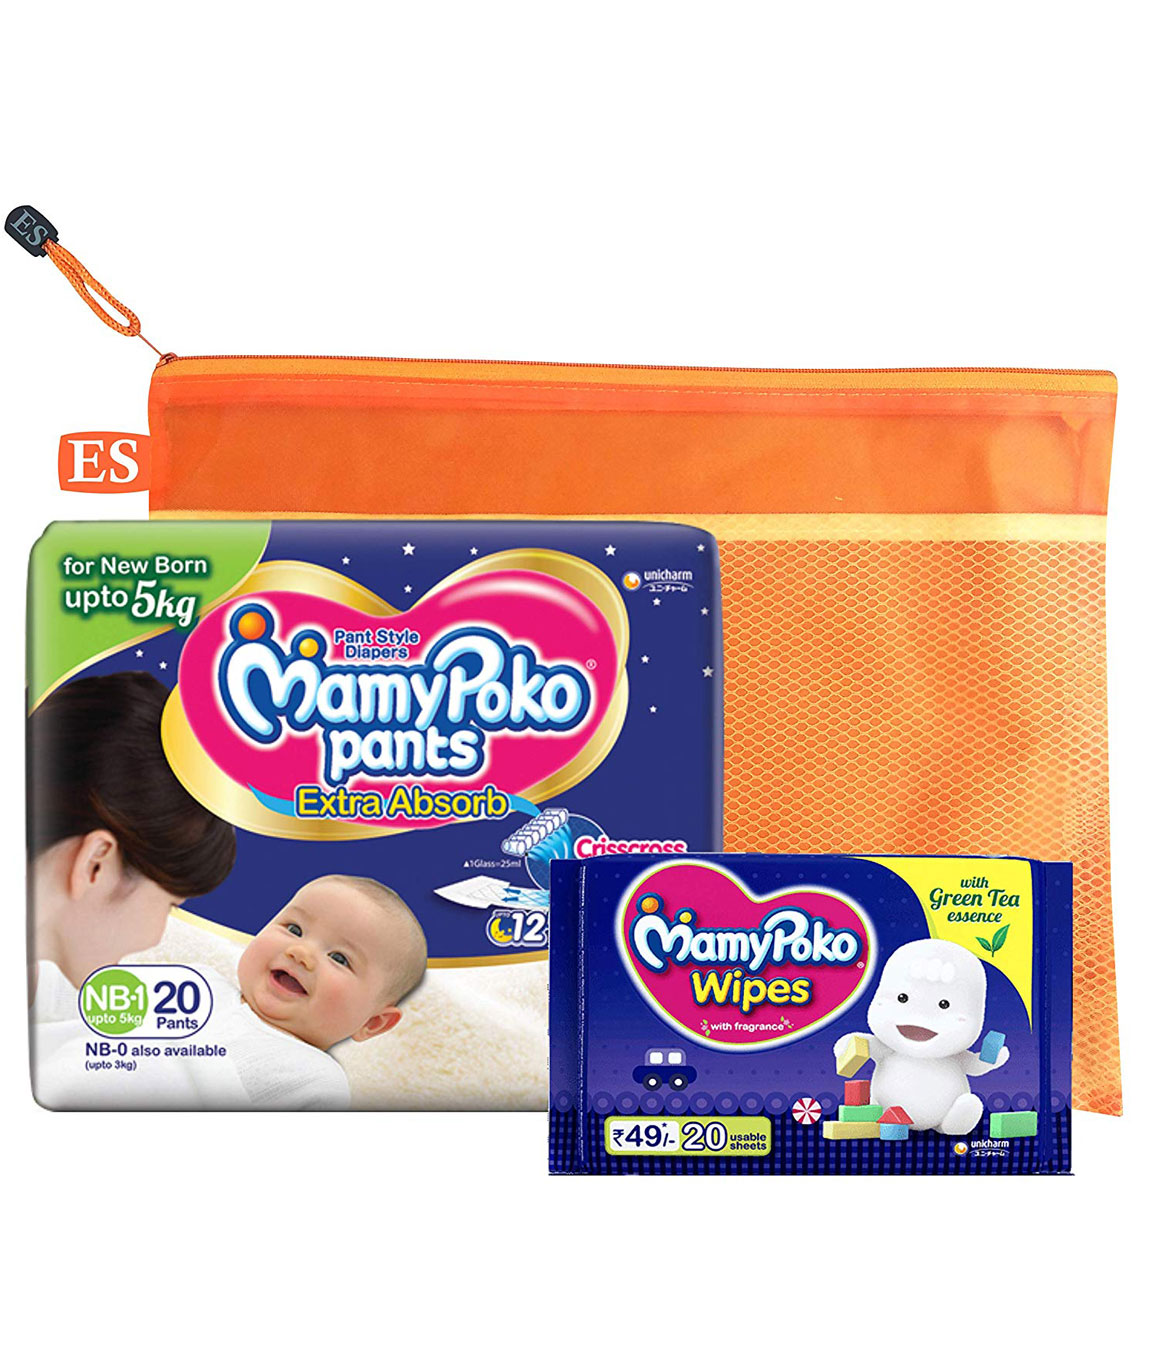 MamyPoko Pants Extra Absorb Diaper New Born Size-17+17+17+17 - New Born -  Buy 68 MamyPoko Pant Diapers | Flipkart.com